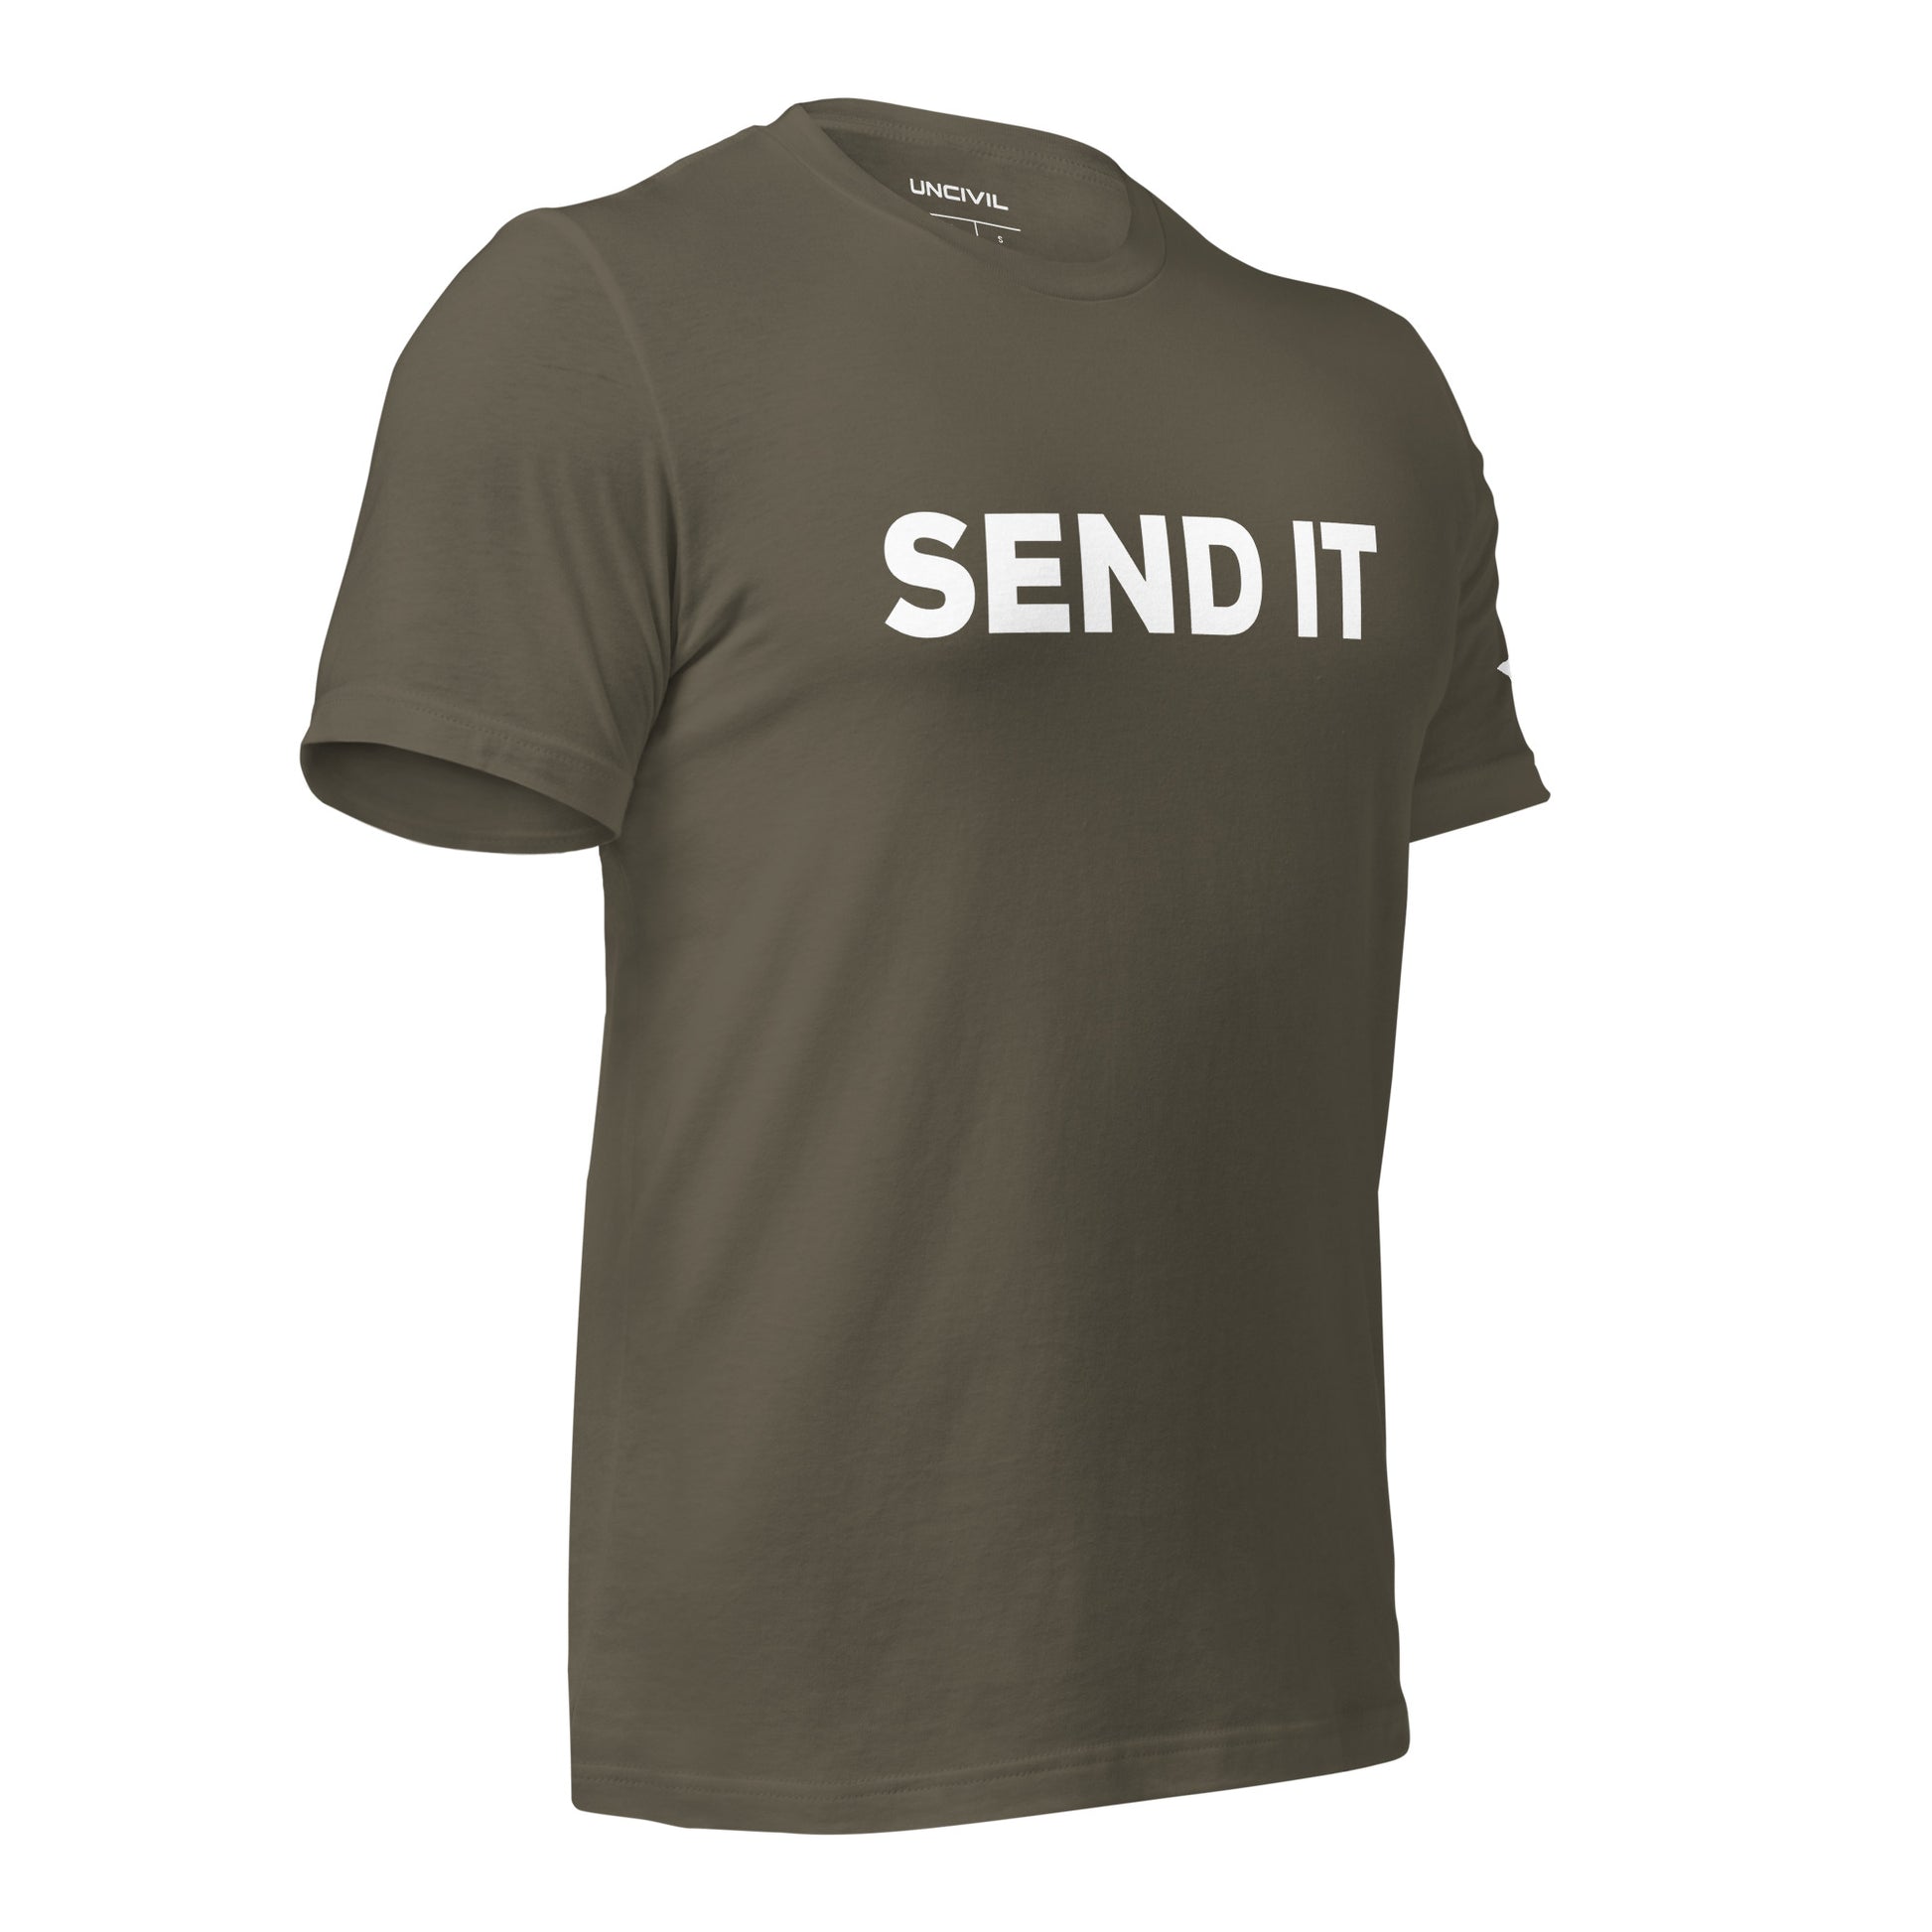 Send It is often used as an expression to indicate taking action or proceeding with a plan. Army Green men's shirt.